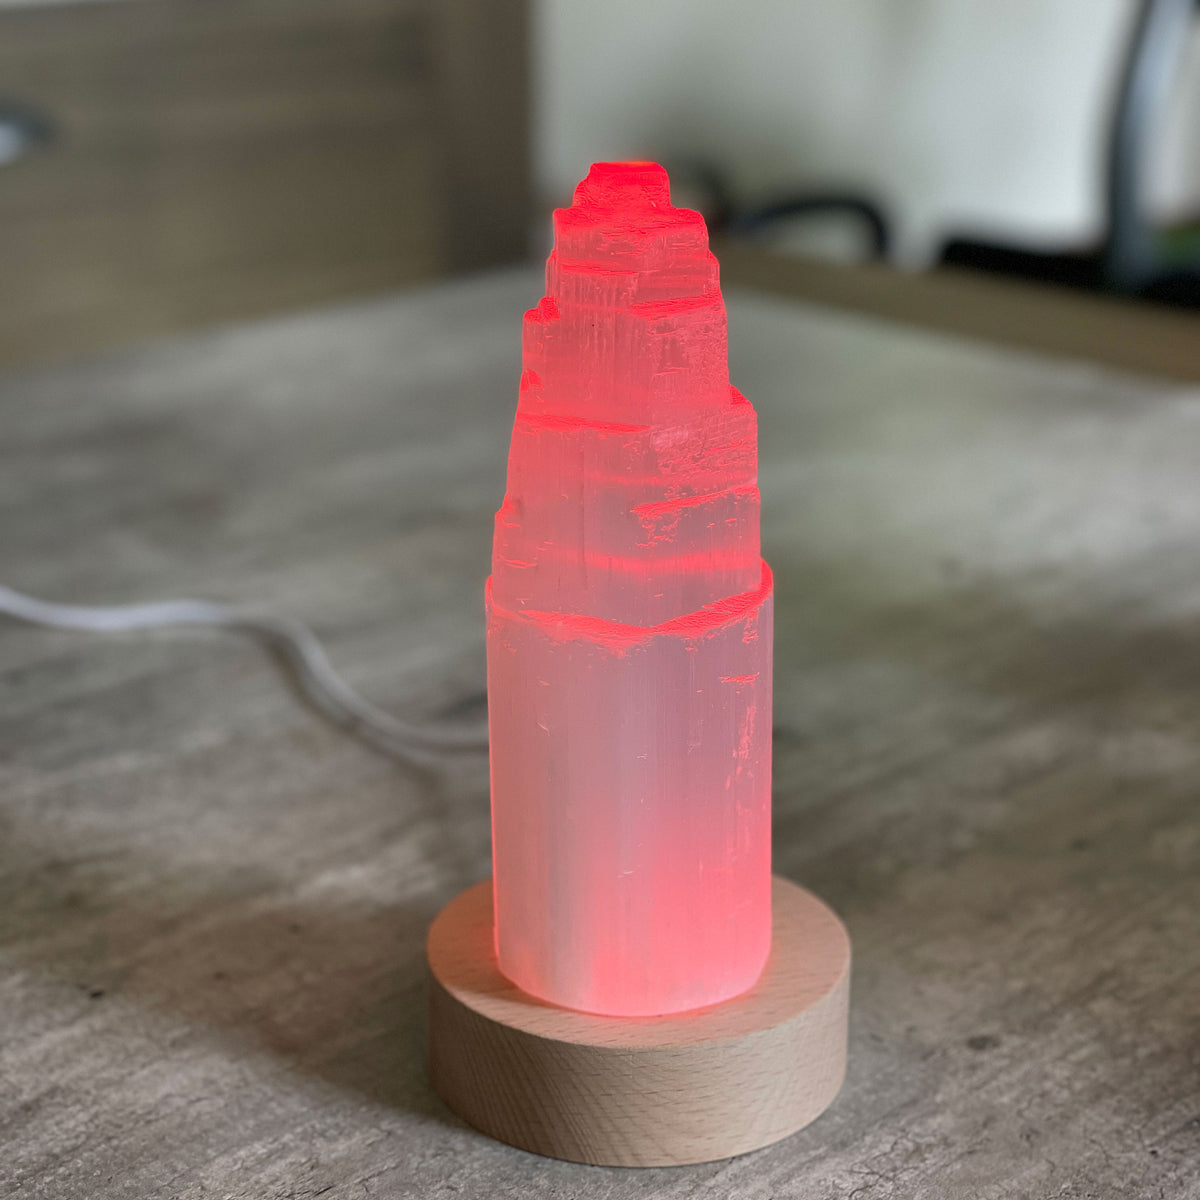 Selenite Lamp - Tower Small - Selenite is a beautiful and versatile crystal that offers numerous benefits, making it a popular choice for both decor and holistic purposes. Its natural beauty and unique translucent appearance make it an eye-catching addition to any home. Selenite emits a soft and warm glow, which makes it an excellent choice for a night light.